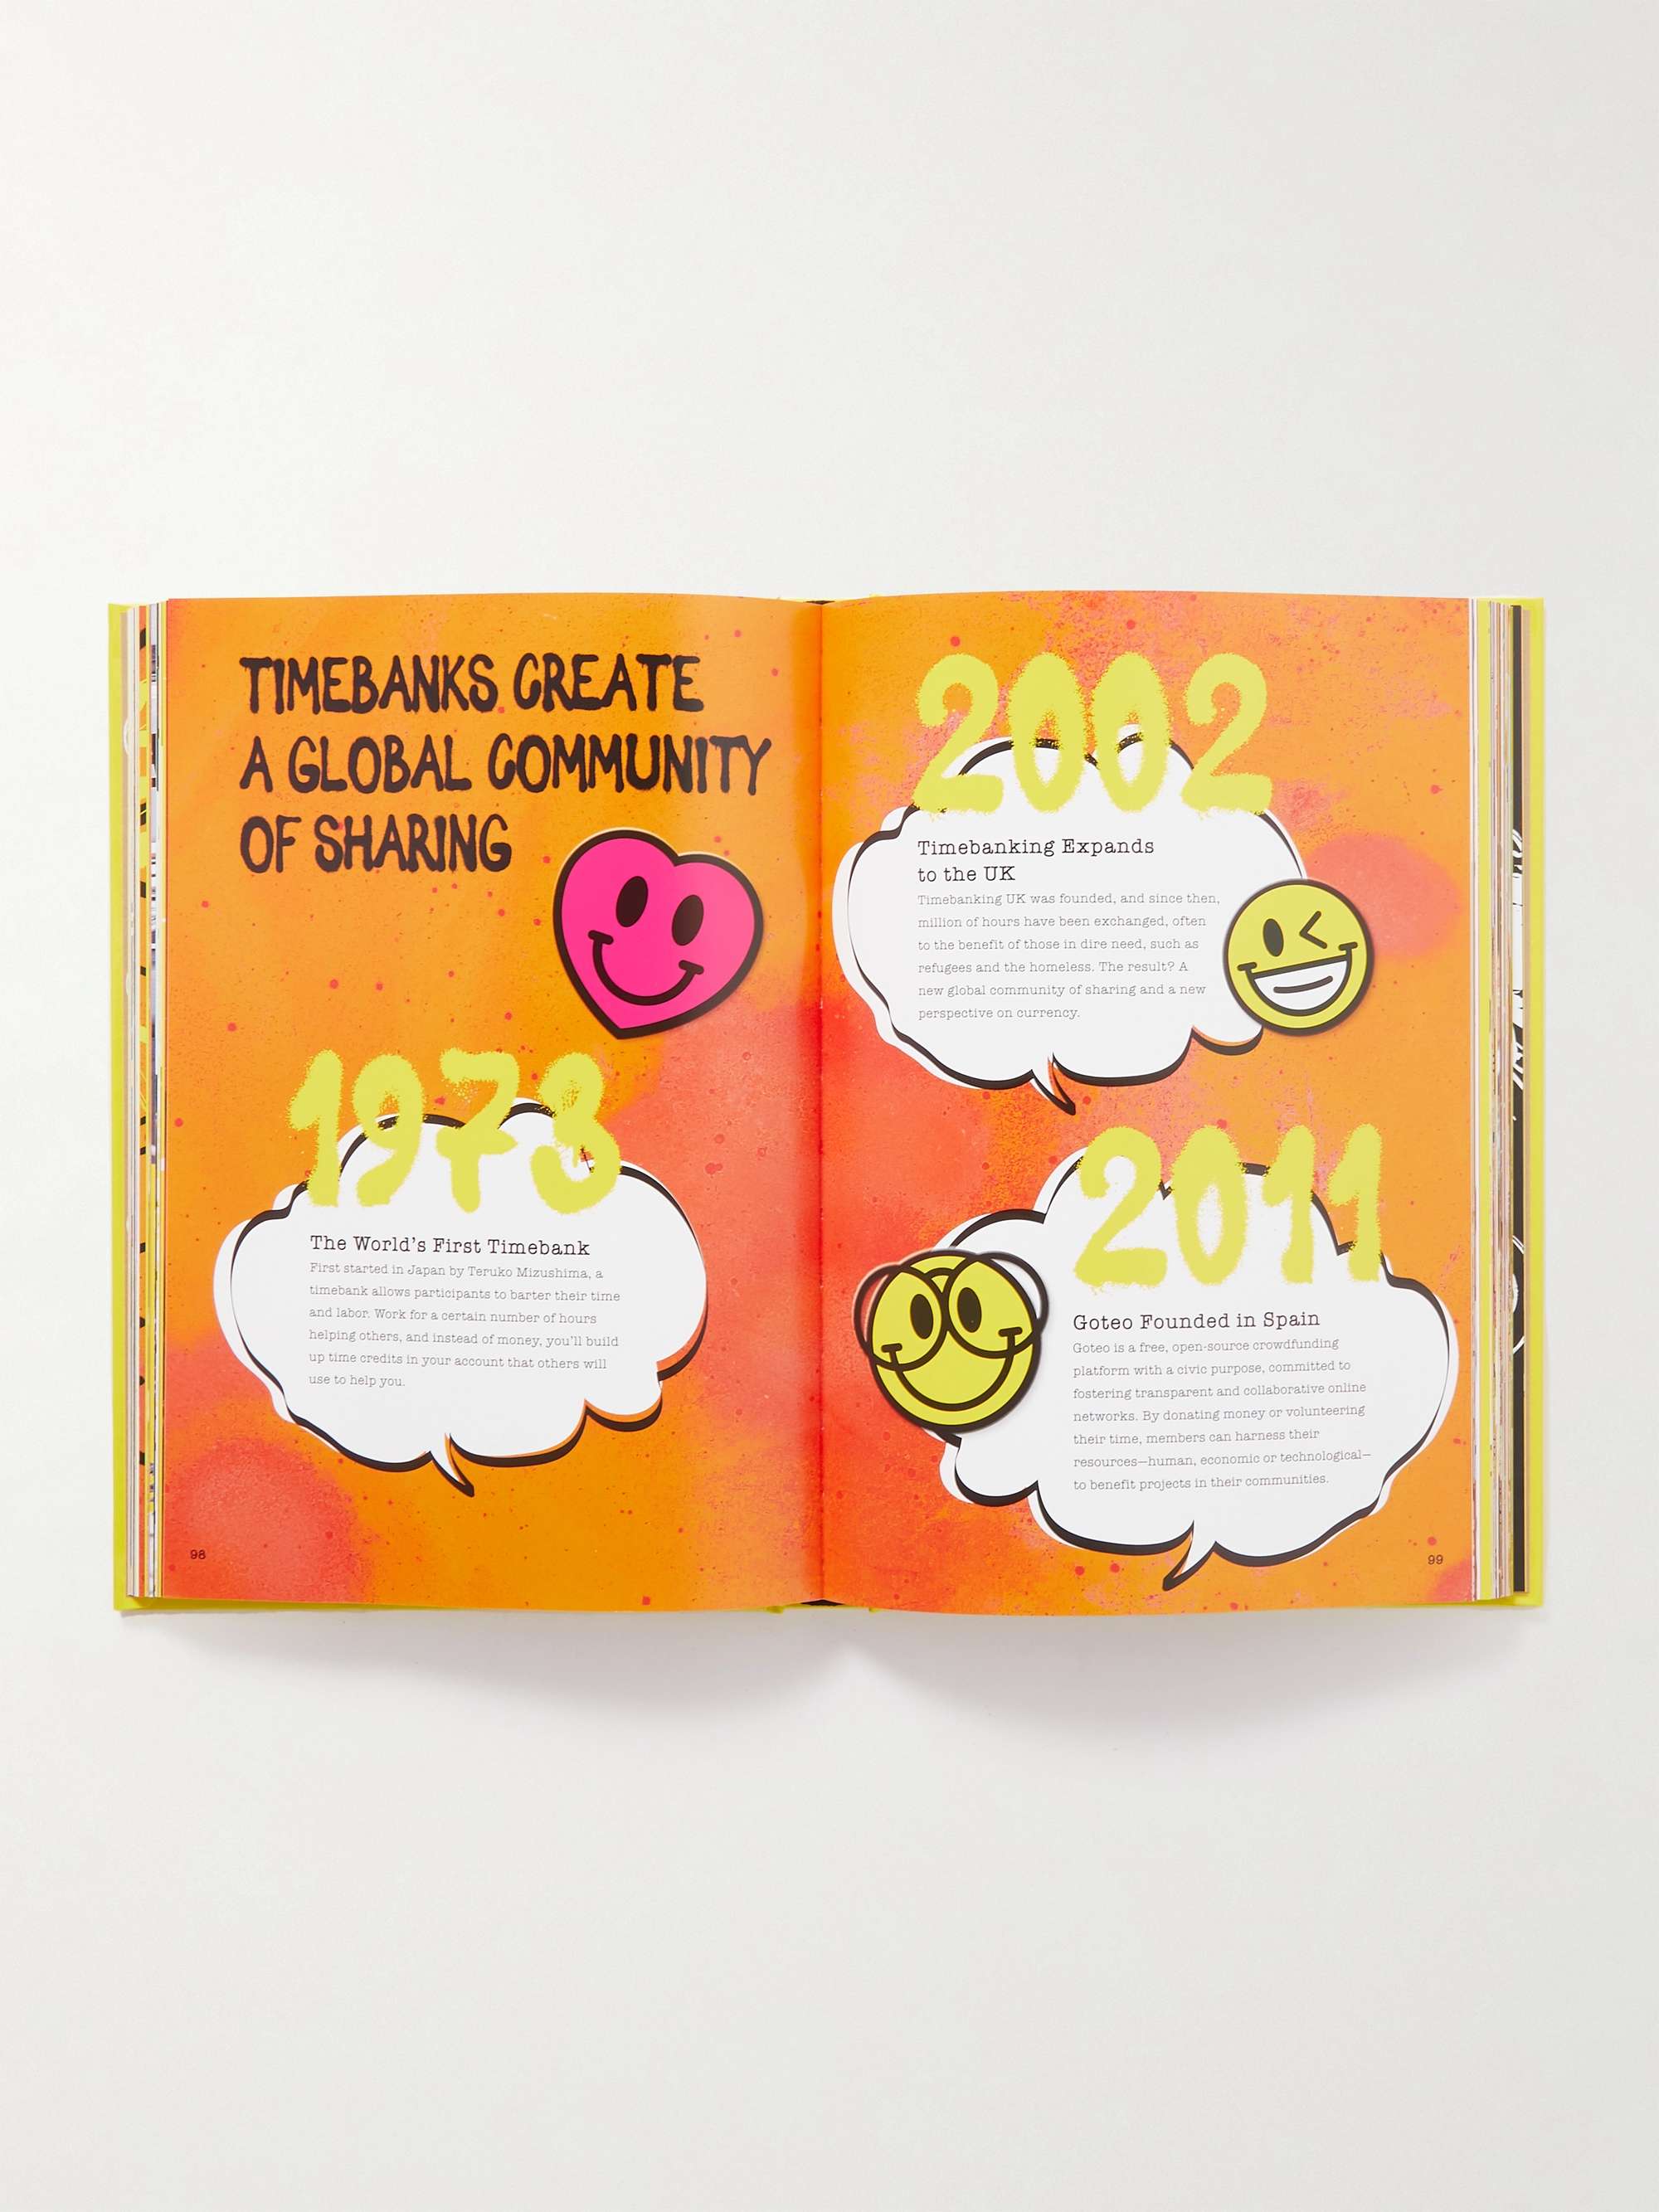 ASSOULINE Smiley: 50 Years of Good News Hardcover Book